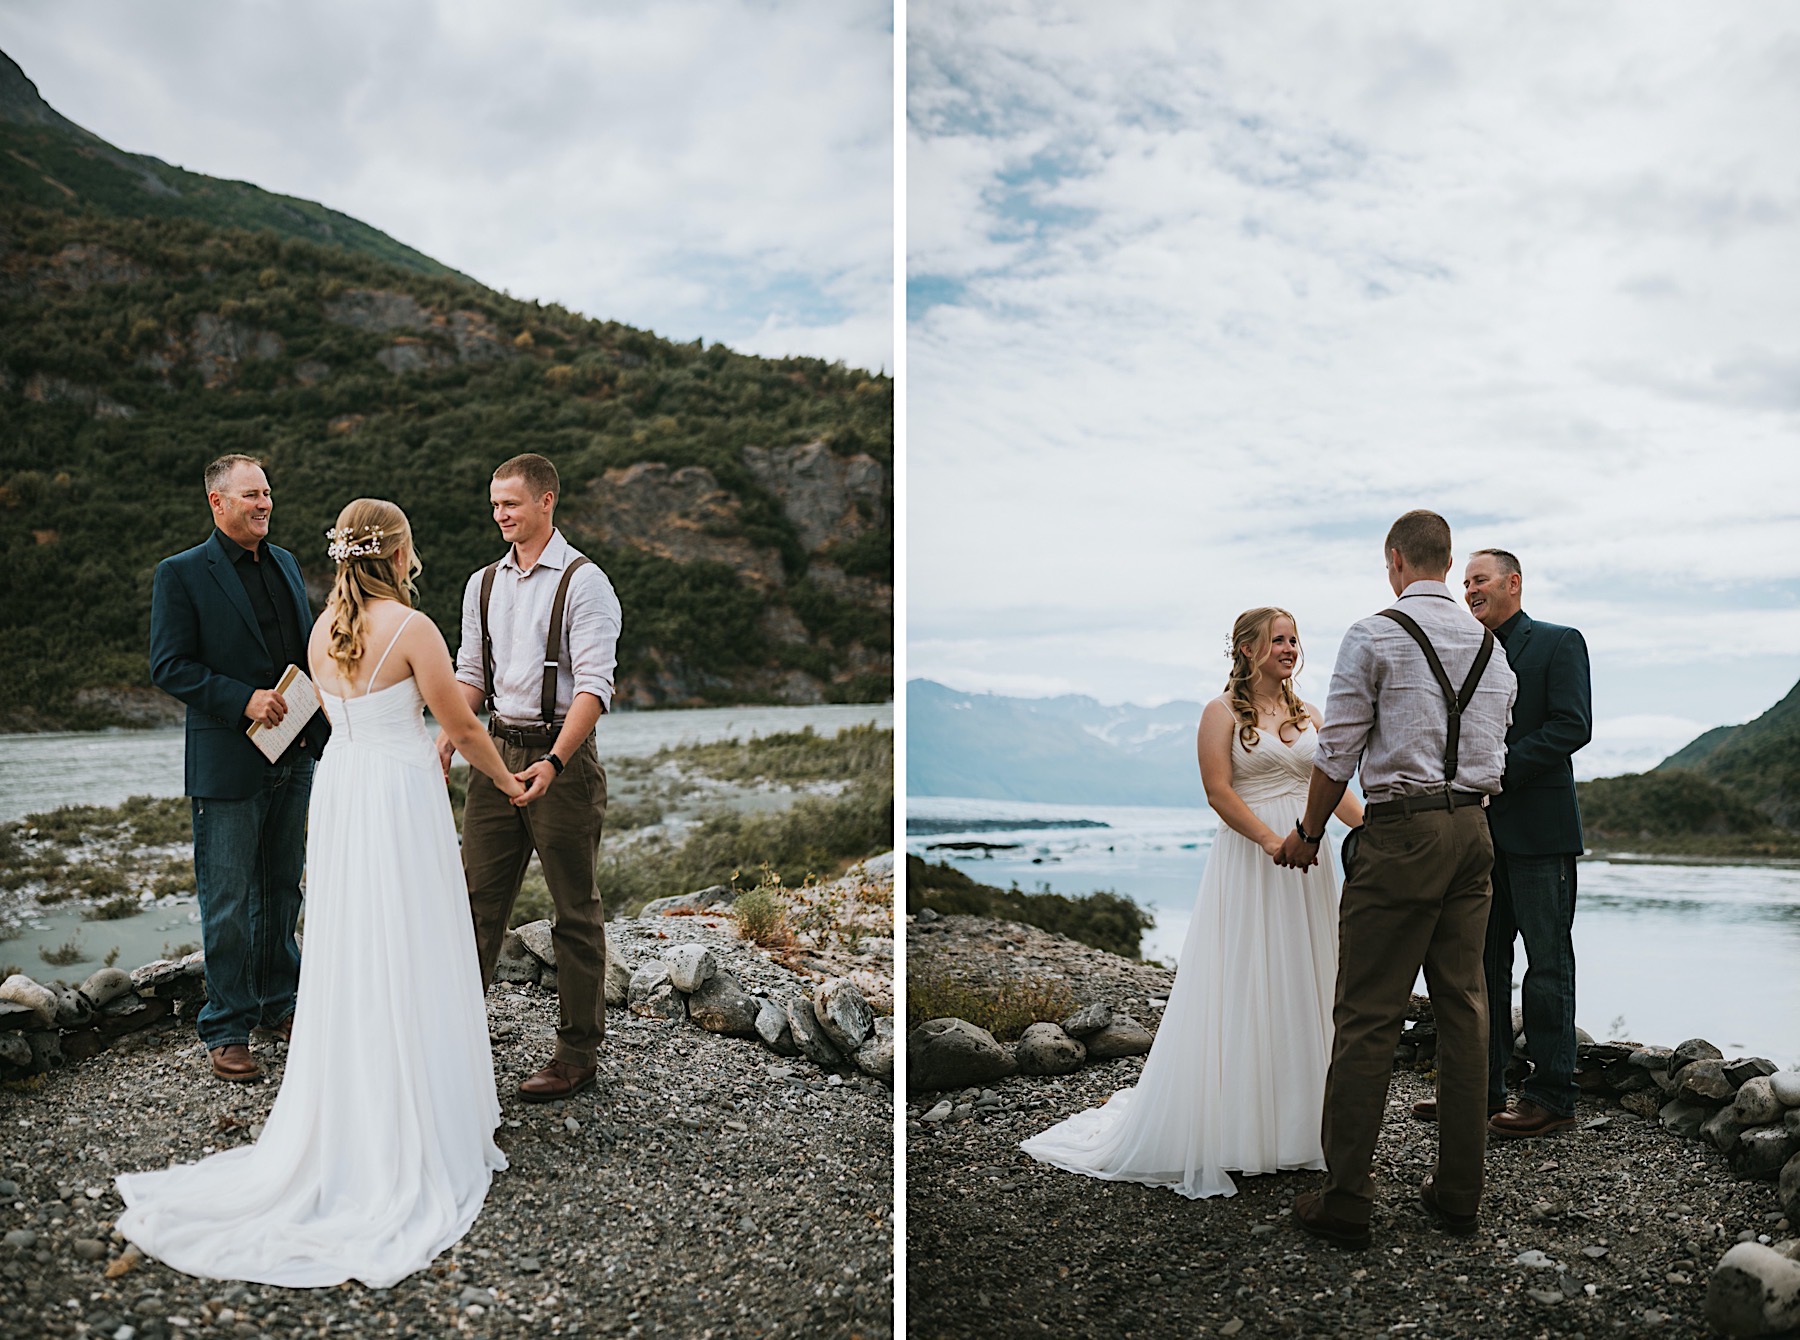 Side by side images of bride and groom during their ceremony